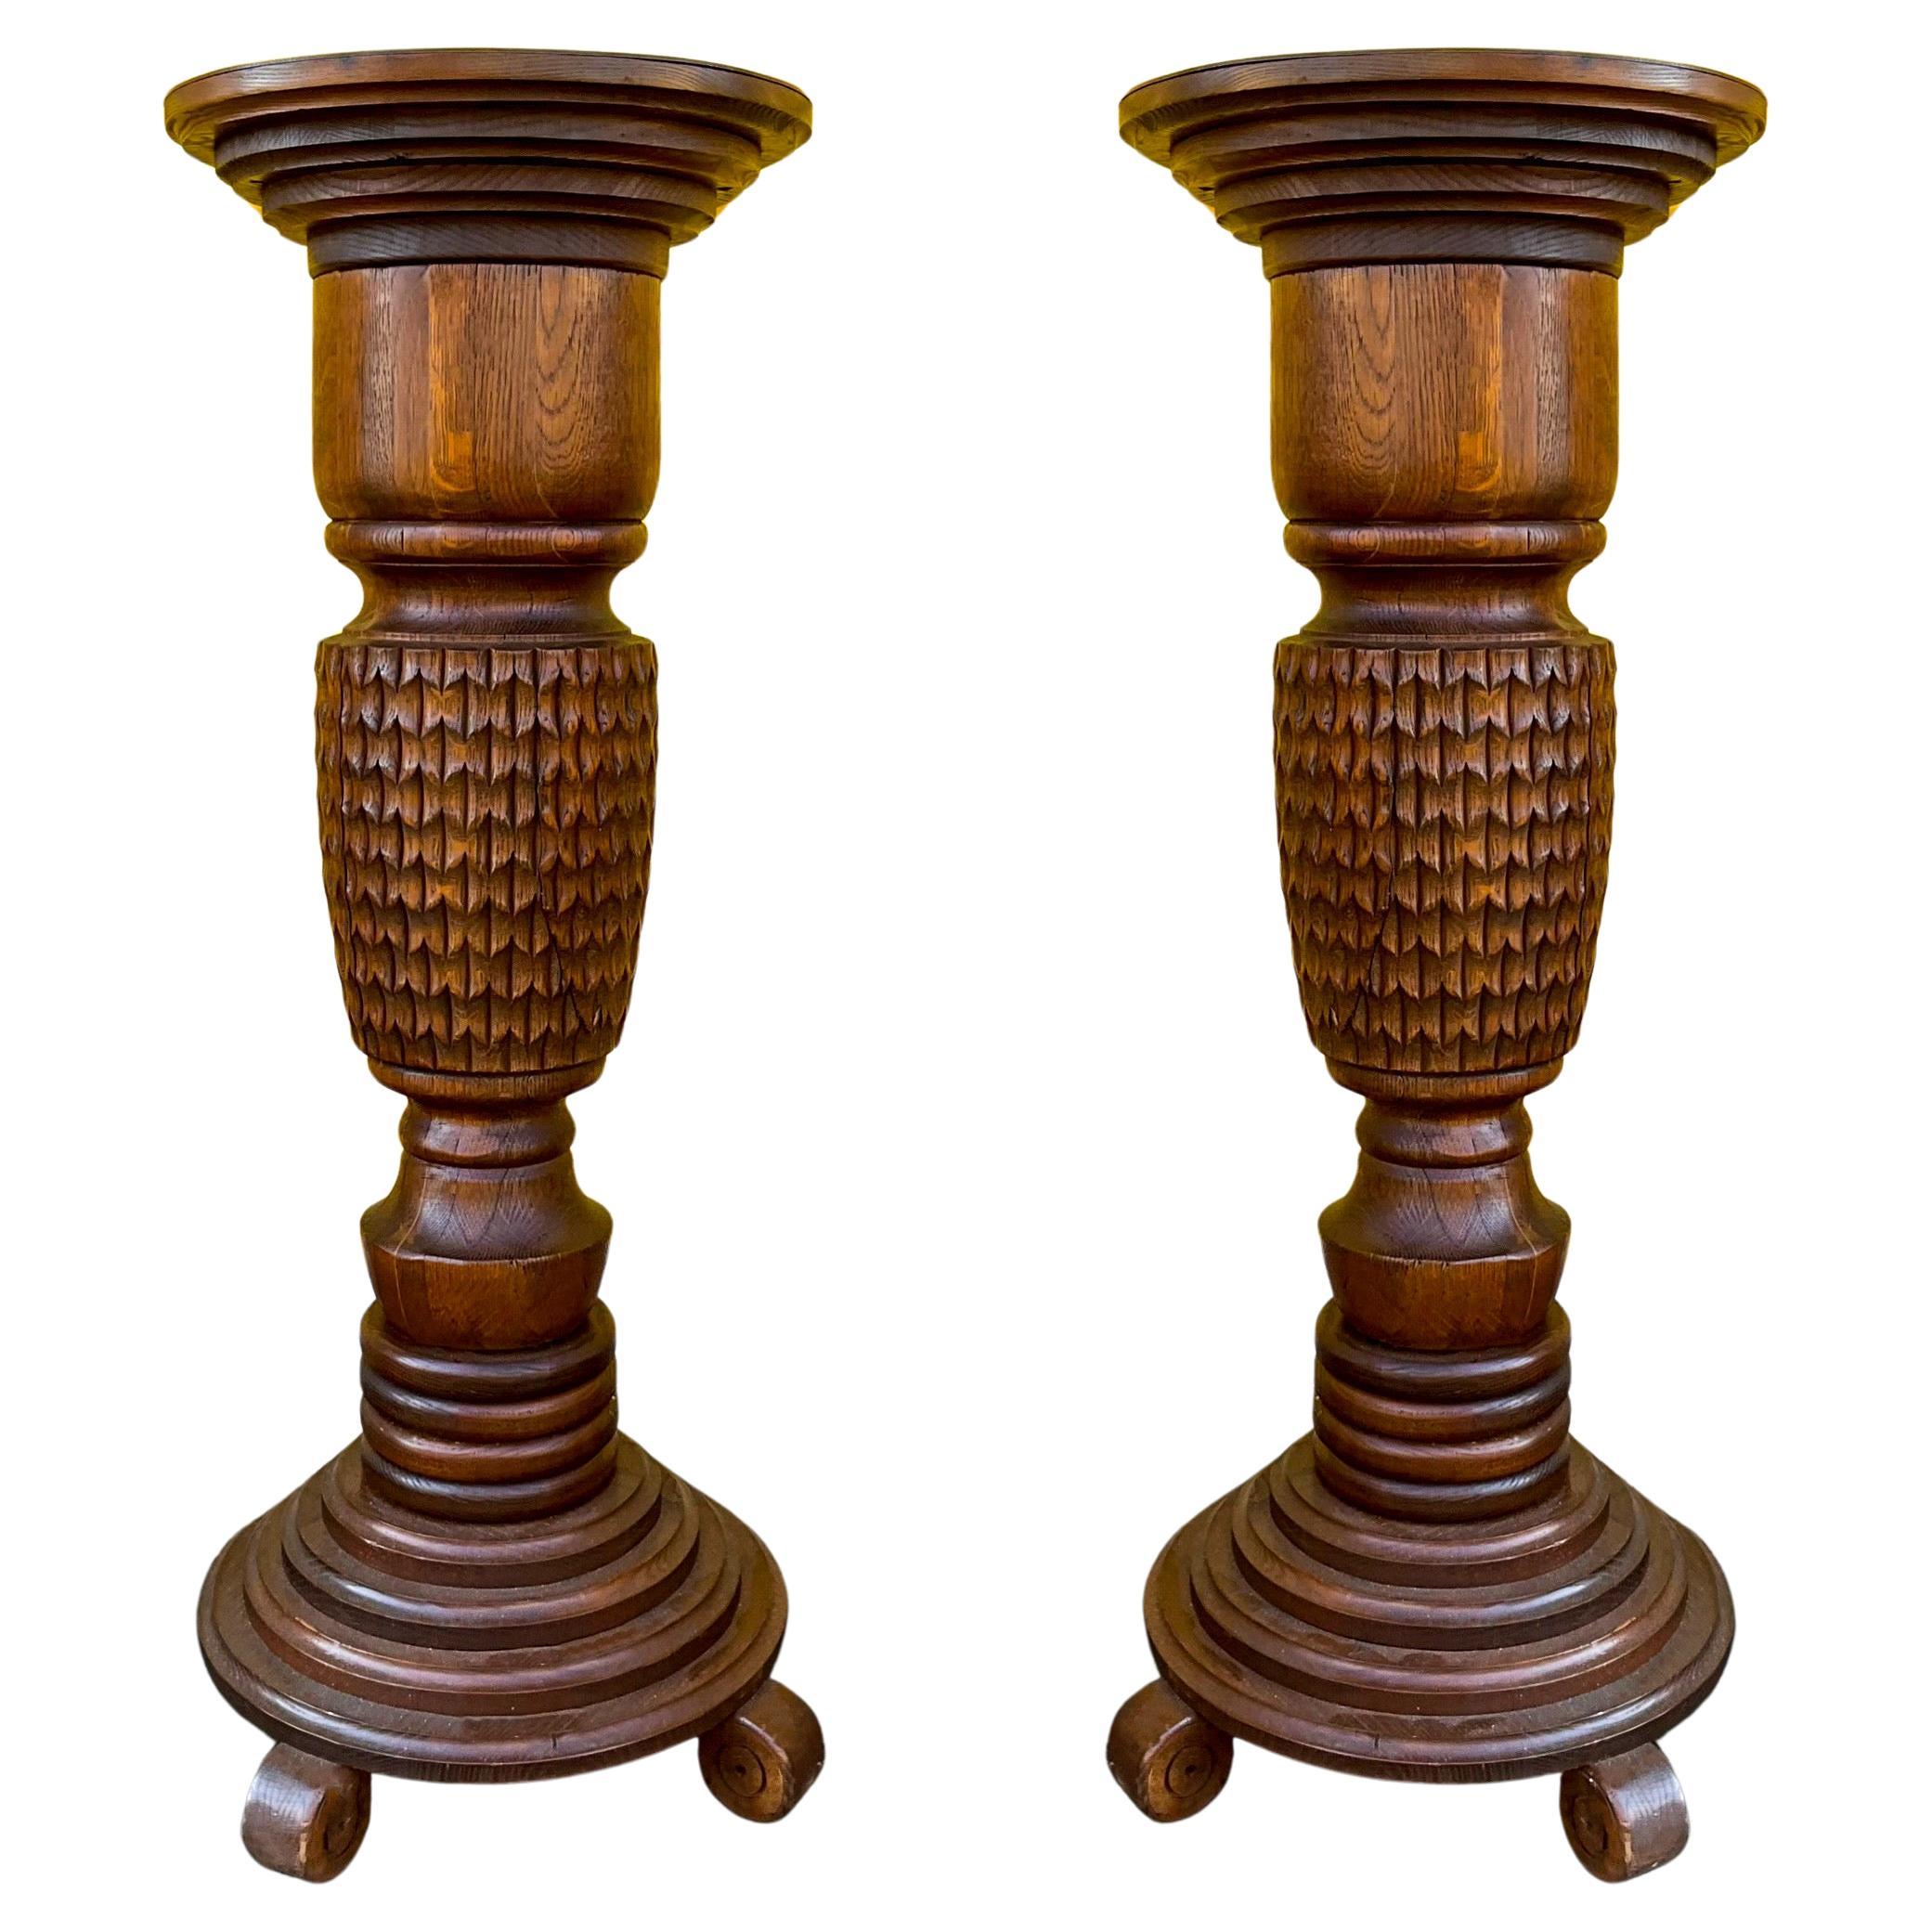 Early 20th-C. British Colonial Style Carved Oak Pineapple Form Pedestals -Pair For Sale